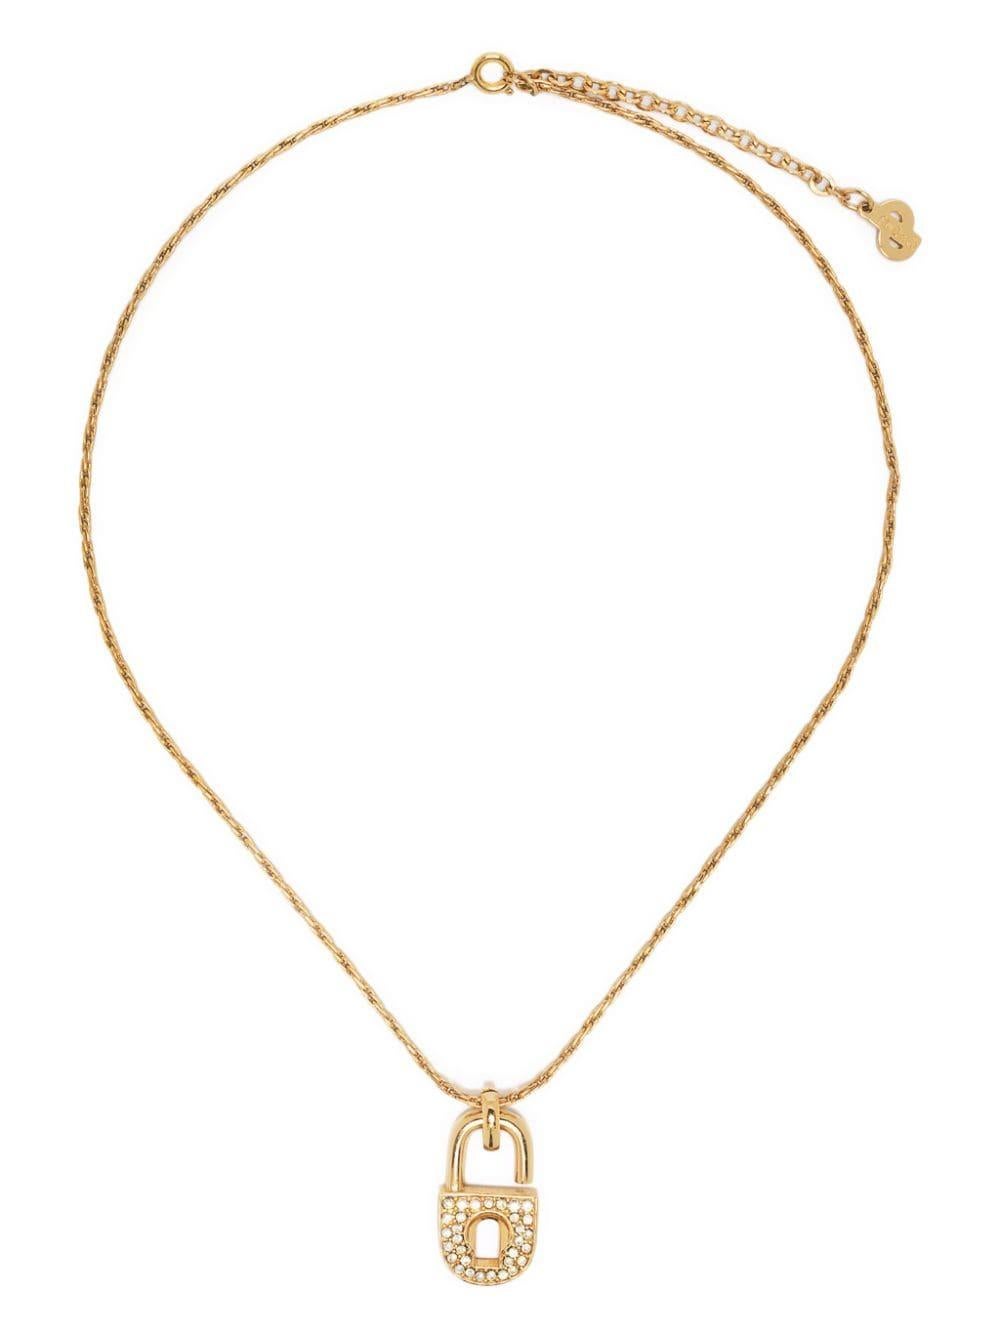 Christian Dior Gold-Tone Padlock Pendant Necklace For Sale 1